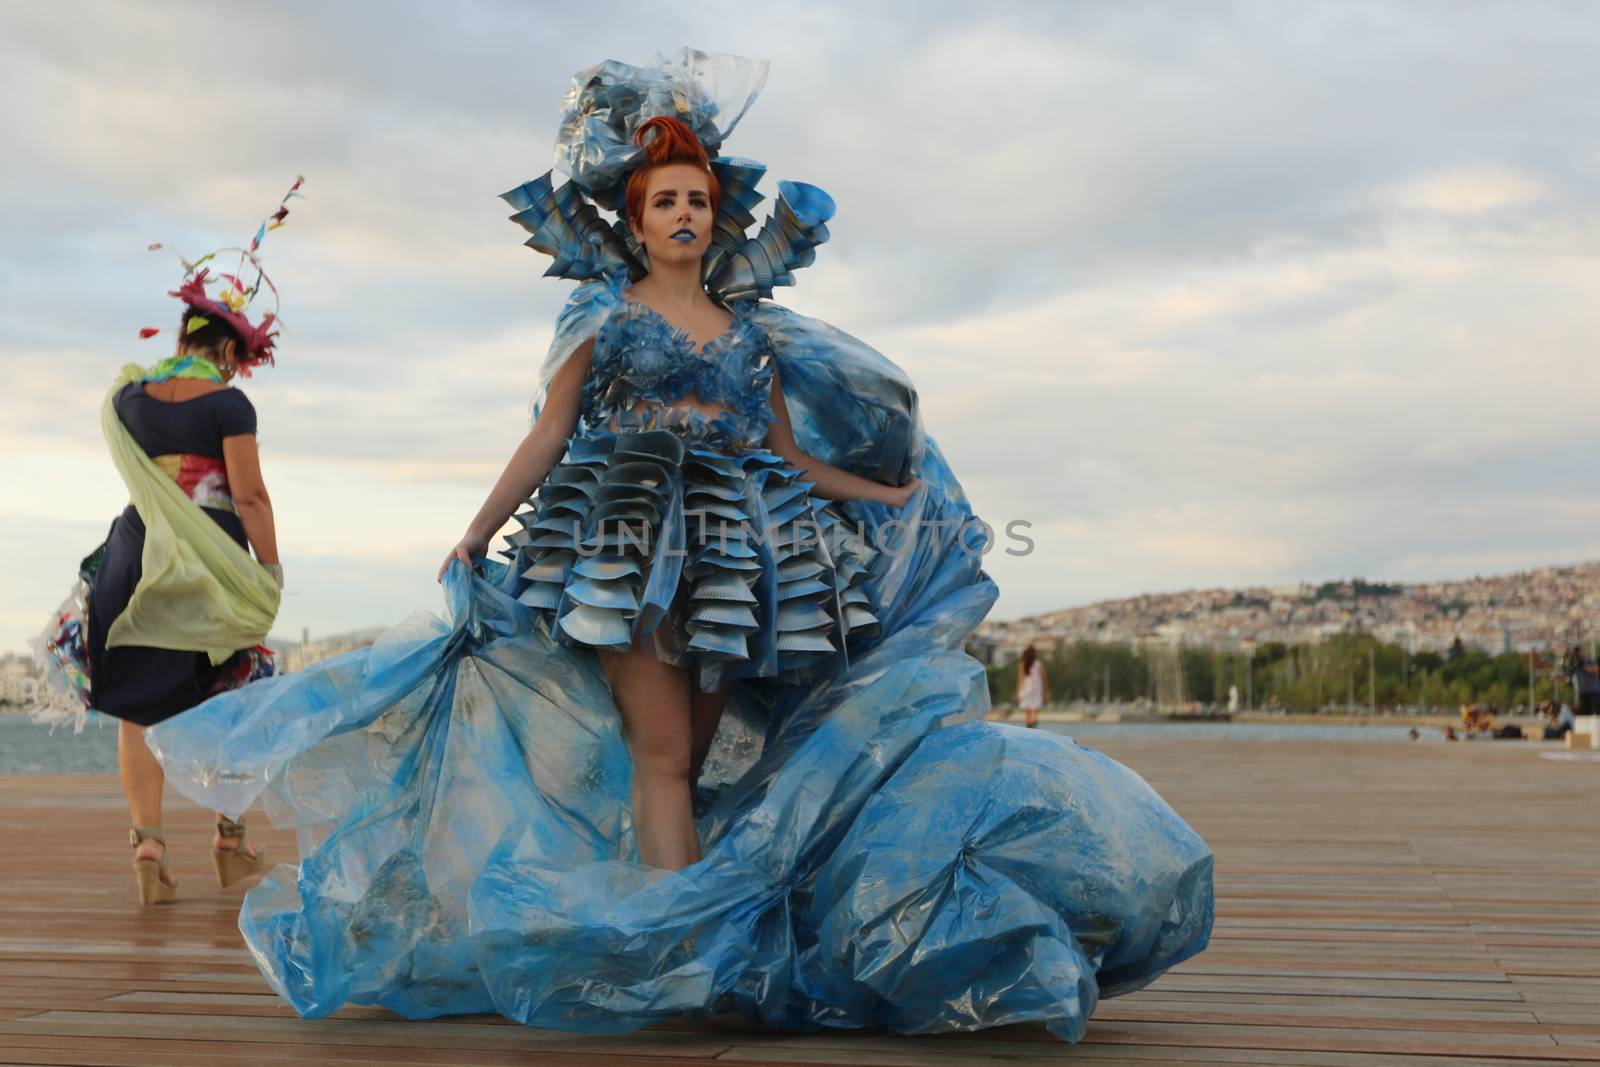 GREECE, Thessaloniki: A quirky outdoor fashion show with clothing made of recycled materials was held on the seafront promenade of Thessaloniki, northern Greece on September 28, 2015.	Professional designers, amateurs, fashionistas, architects and artists inspired by the city, the sea, the sky, the light and the colors of the New Promenade made unique creations from worthless items and recycled fabrics.